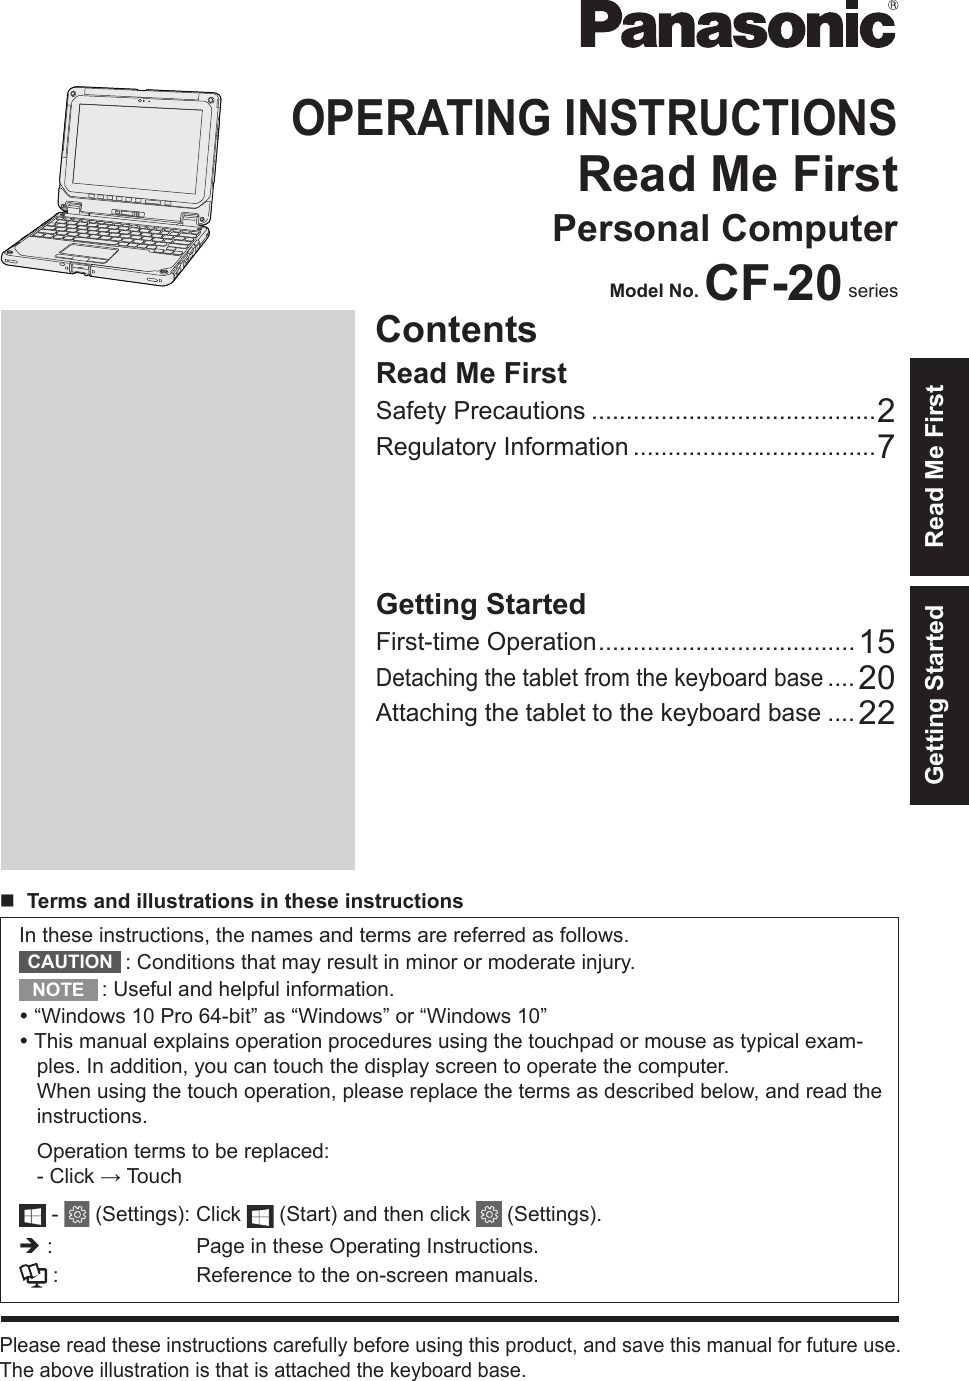 ContentsOPERATING INSTRUCTIONSRead Me FirstPersonal ComputerModel No. CF-20 seriesPlease read these instructions carefully before using this product, and save this manual for future use.The above illustration is that is attached the keyboard base.Getting StartedIn these instructions, the names and terms are referred as follows.: Conditions that may result in minor or moderate injury.: Useful and helpful information.“Windows 10 Pro 64-bit” as “Windows” or “Windows 10”This manual explains operation procedures using the touchpad or mouse as typical exam-ples. In addition, you can touch the display screen to operate the computer.When using the touch operation, please replace the terms as described below, and read theinstructions.Operation terms to be replaced:-Click → Touch- (Settings): Click   (Start) and then click   (Settings).è: Page in these Operating Instructions.: Reference to the on-screen manuals.Getting StartedFirst-time Operation .....................................15Detaching the tablet from the keyboard base .... 20Attaching the tablet to the keyboard base ....22Read Me FirstSafety Precautions .........................................2Regulatory Information ...................................7nTerms and illustrations in these instructionsCAUTIONNOTERead Me First